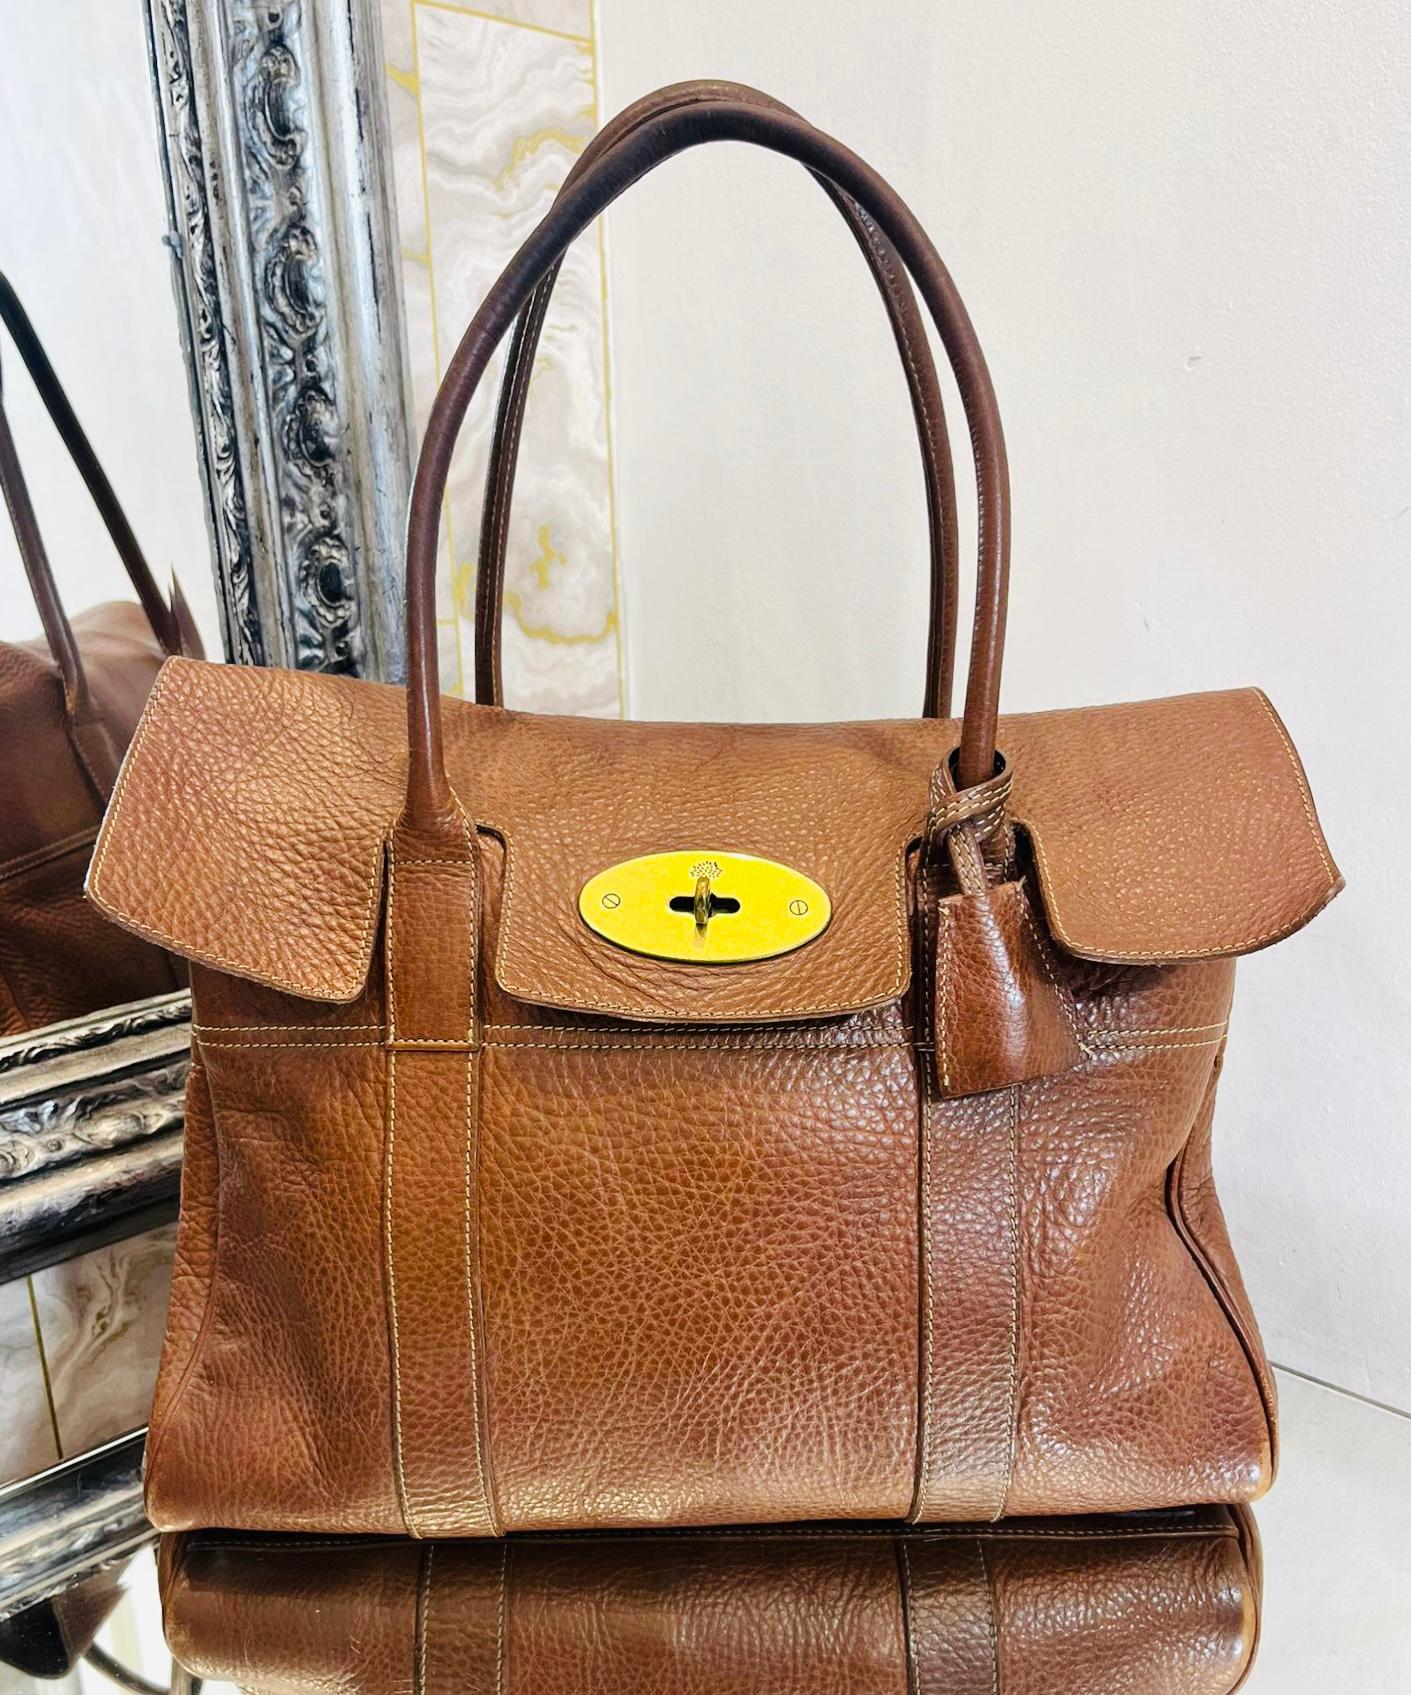 Mulberry Bayswater Leather Bag 

Brown, timeless bag designed with gold, iconic Postman’s Lock and flap closure. 

Detailed with hanging leather fob with hidden padlock and dual rolled top handles.

Featuring spacious interior with adjustable,